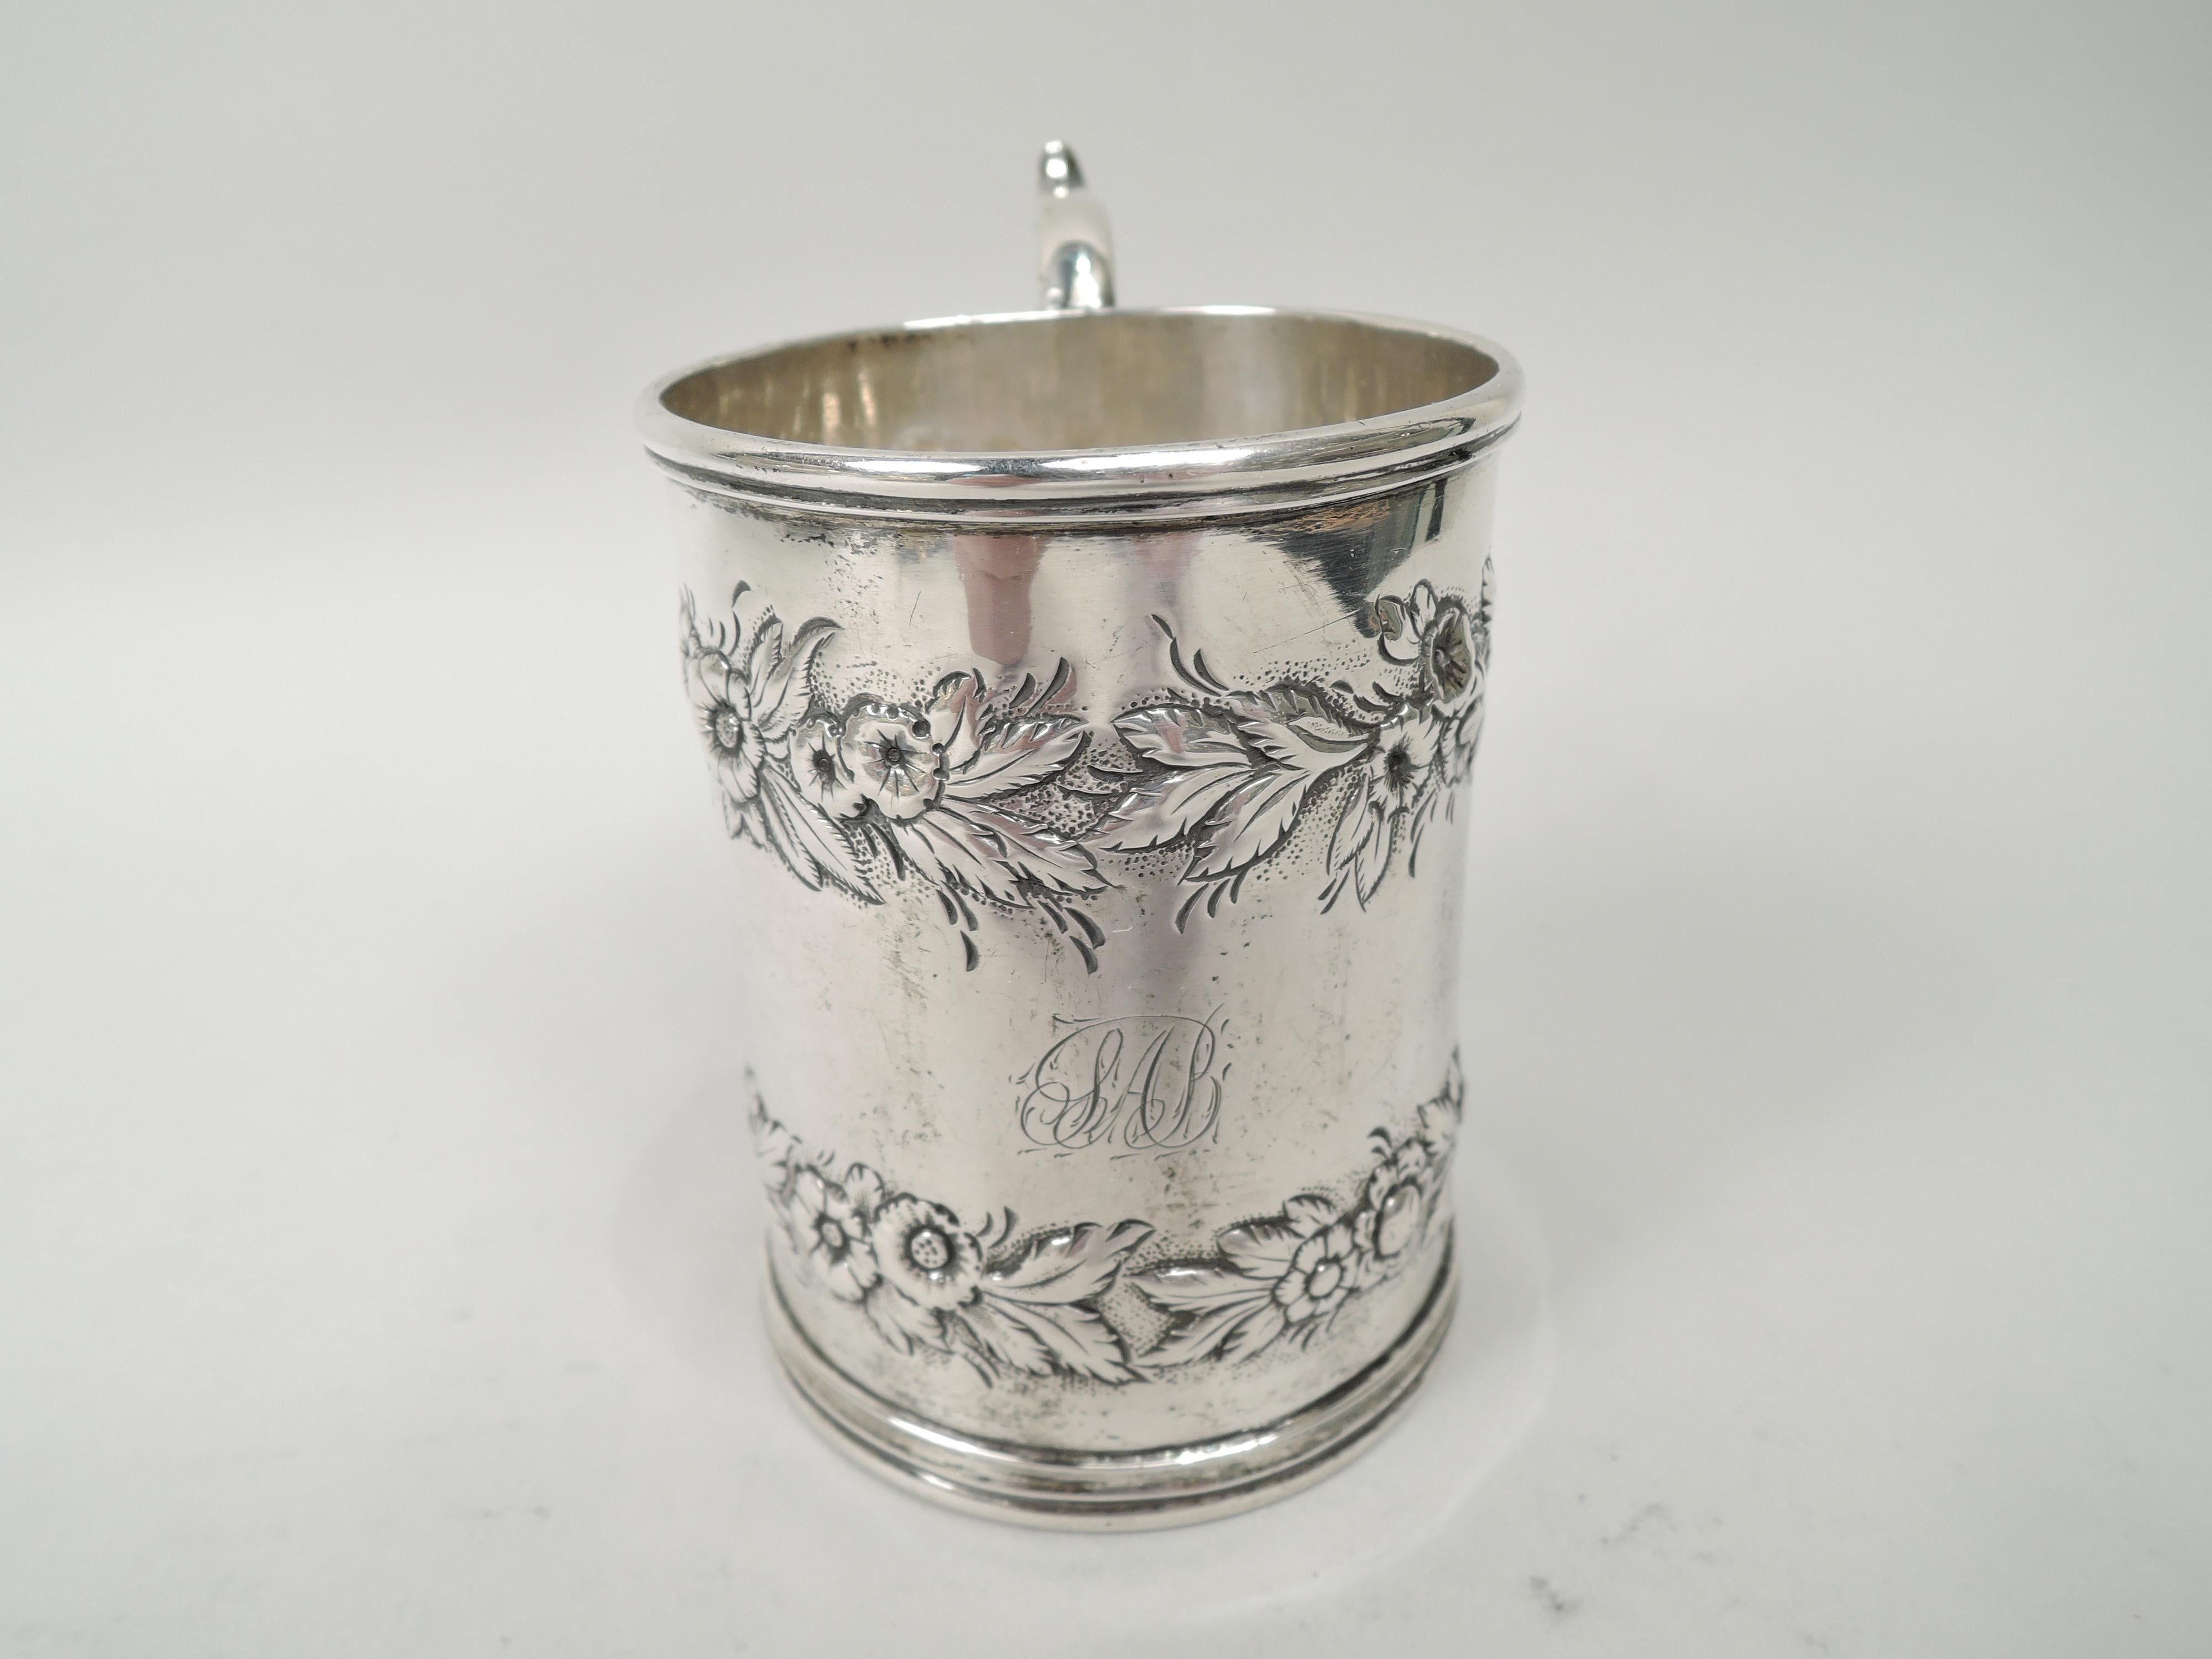 Victorian silver baby cup. Made by S. Kirk, ca 1840. Gently upward tapering sides, molded rims, and leaf-capped double-scroll handle. Two chased floral garlands. Engraved script monogram. Marks include maker’s stamp (1830-46). Weight: 4.7 troy